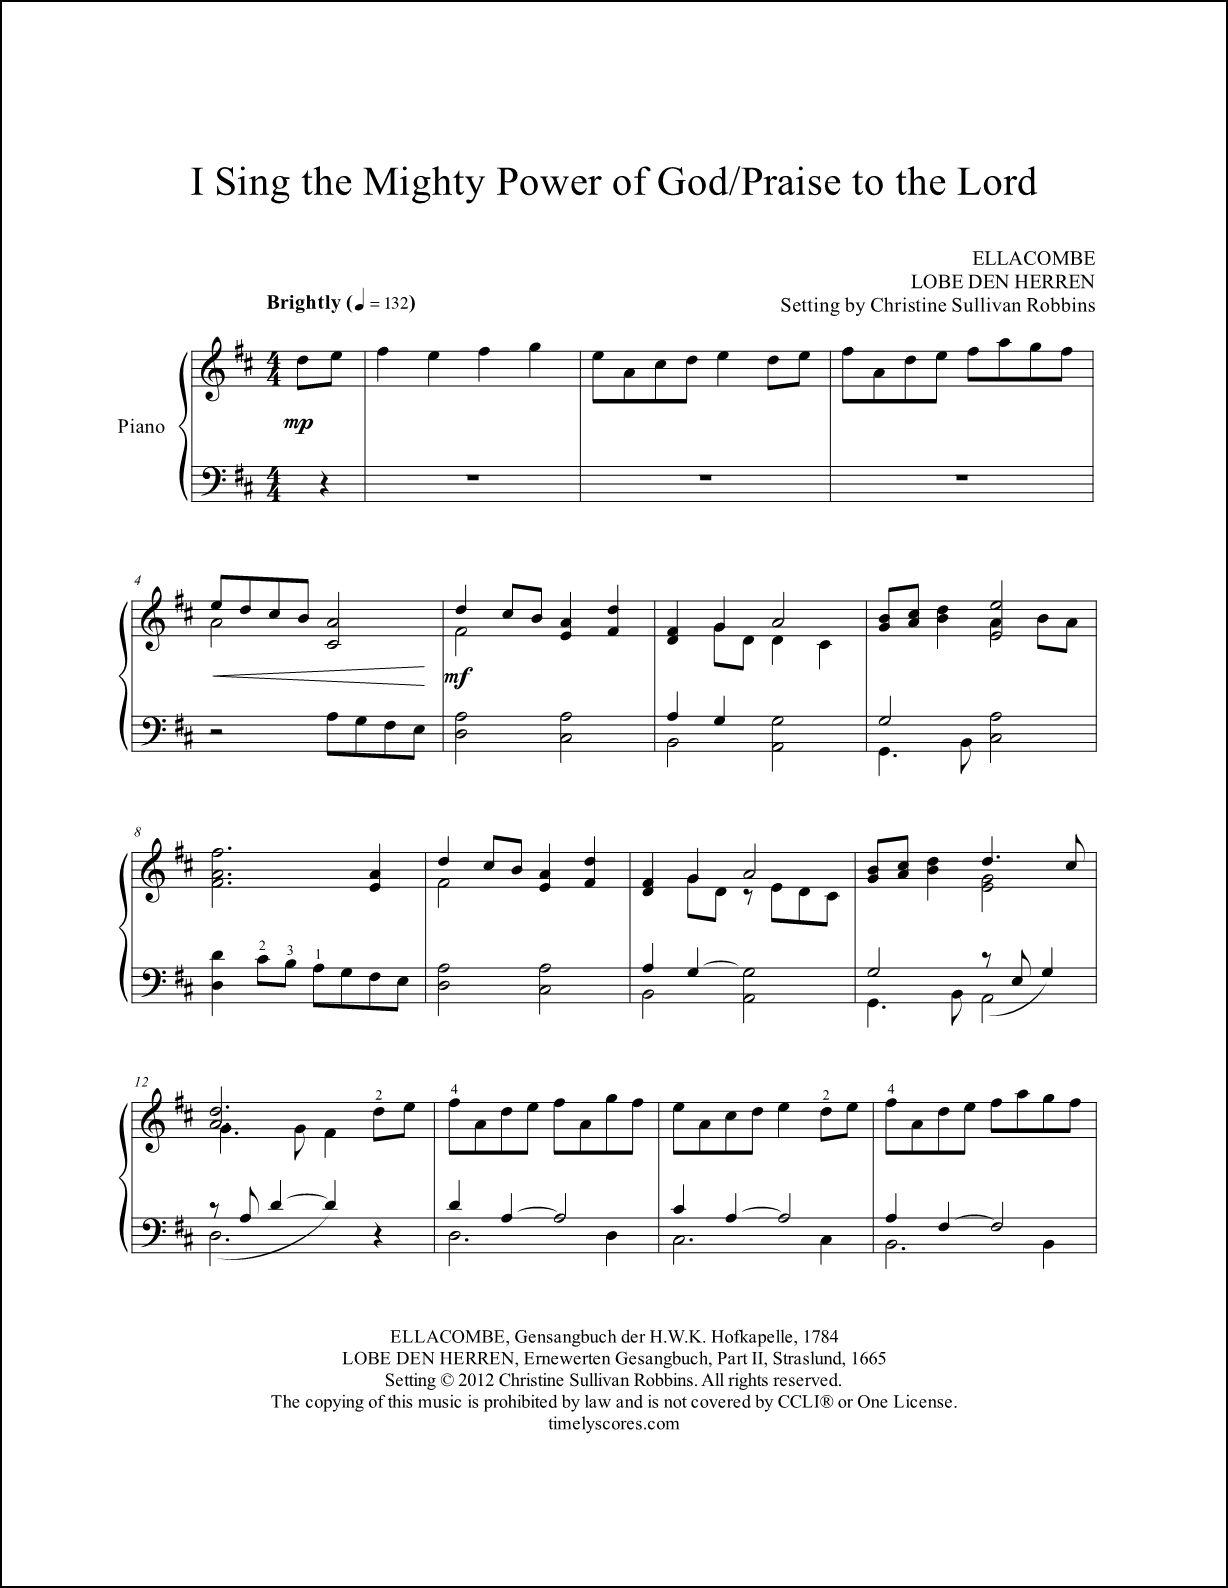 I Sing the Mighty Power of with God Praise to the Lord Piano Sheet Music